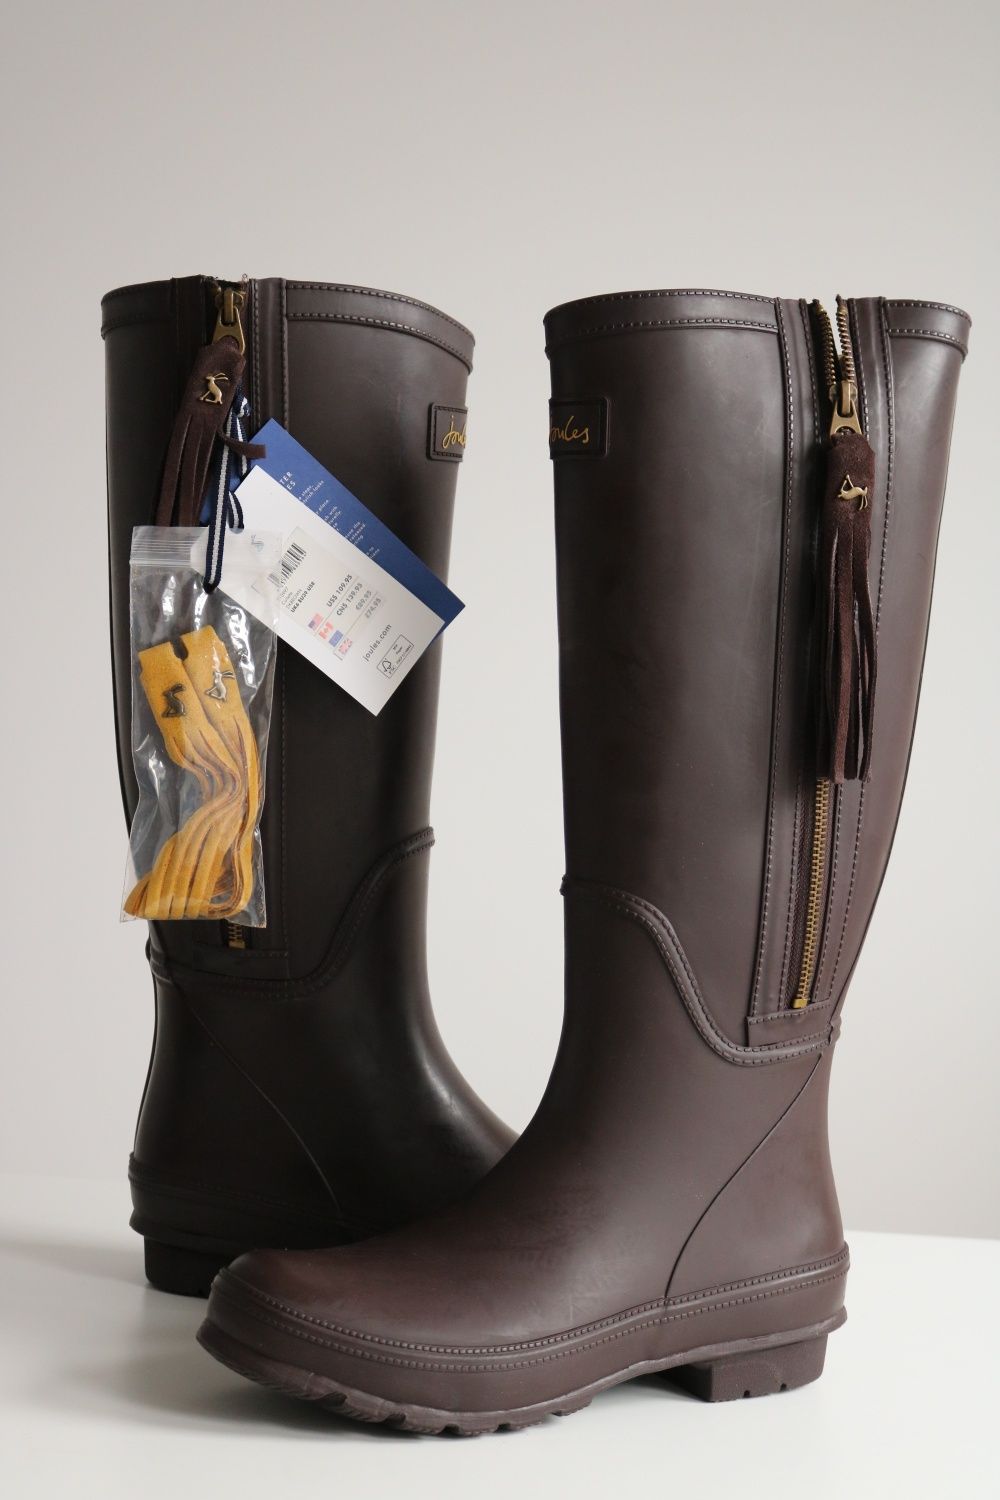 Cizme cauciuc dama - Joules Welly Boots